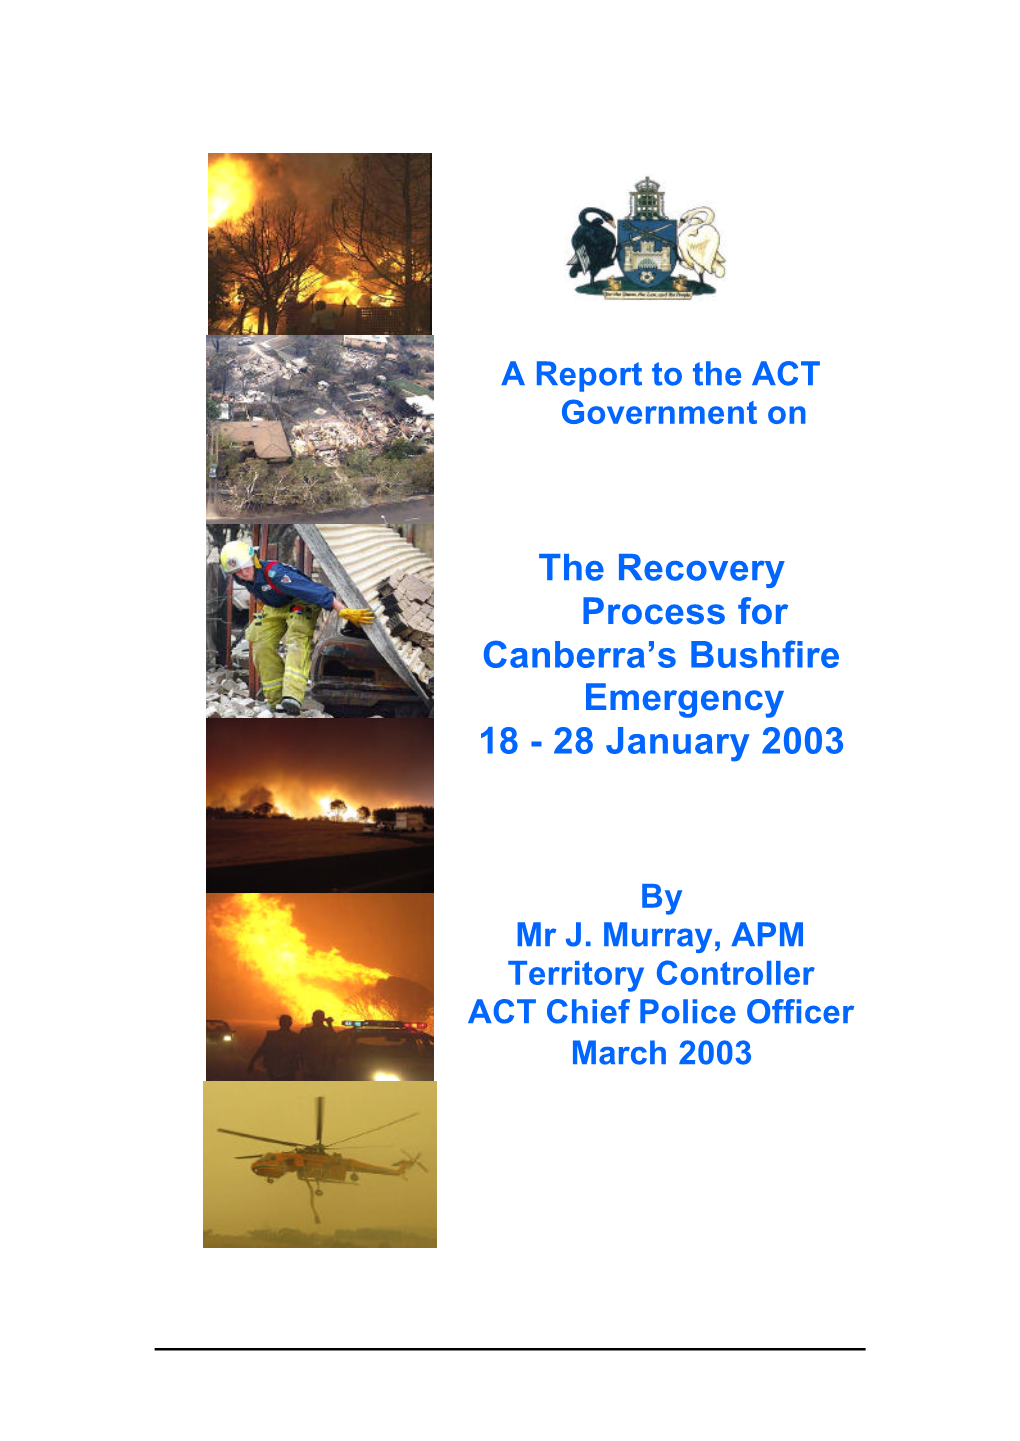 The Recovery Process for Canberra's Bushfire Emergency 18-28 January